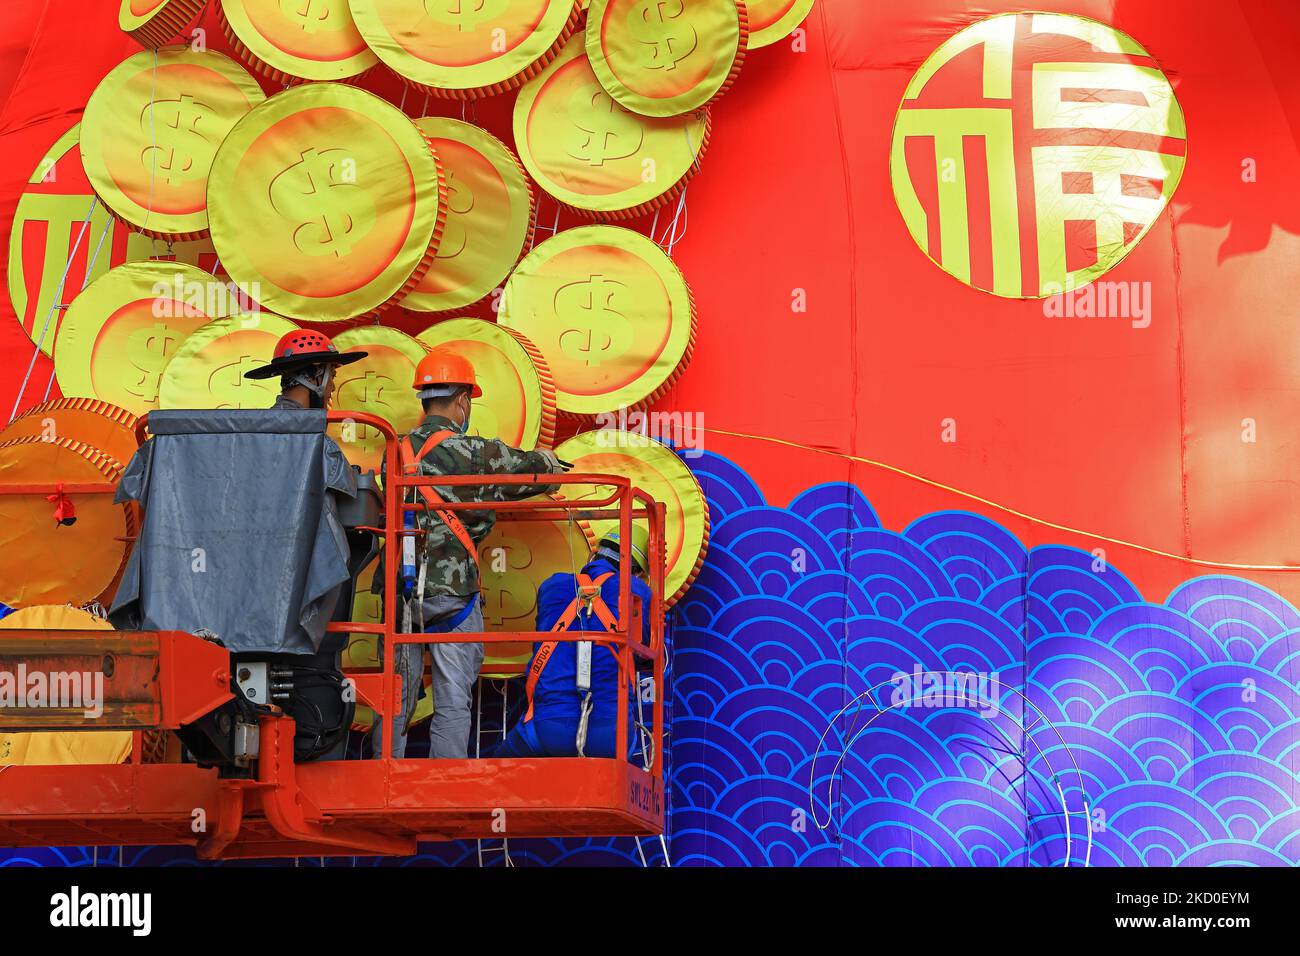 Workers put up decorative gold coins on a giant lantern display featuring the God of Fortune as Singapore prepares to usher in the Year of the Tiger amid the rise in the Omicron variant cases during the COVID-19 pandemic at the Supertree Grove, Gardens by the Bay on January 16, 2022 in Singapore. On February 1, people around the world will welcome the Year of the Tiger, one of the most anticipated holidays on the Chinese calendar. Also known as the Spring festival or the Lunar New Year, the celebrations last for about 15 days. (Photo by Suhaimi Abdullah/NurPhoto) Stock Photo